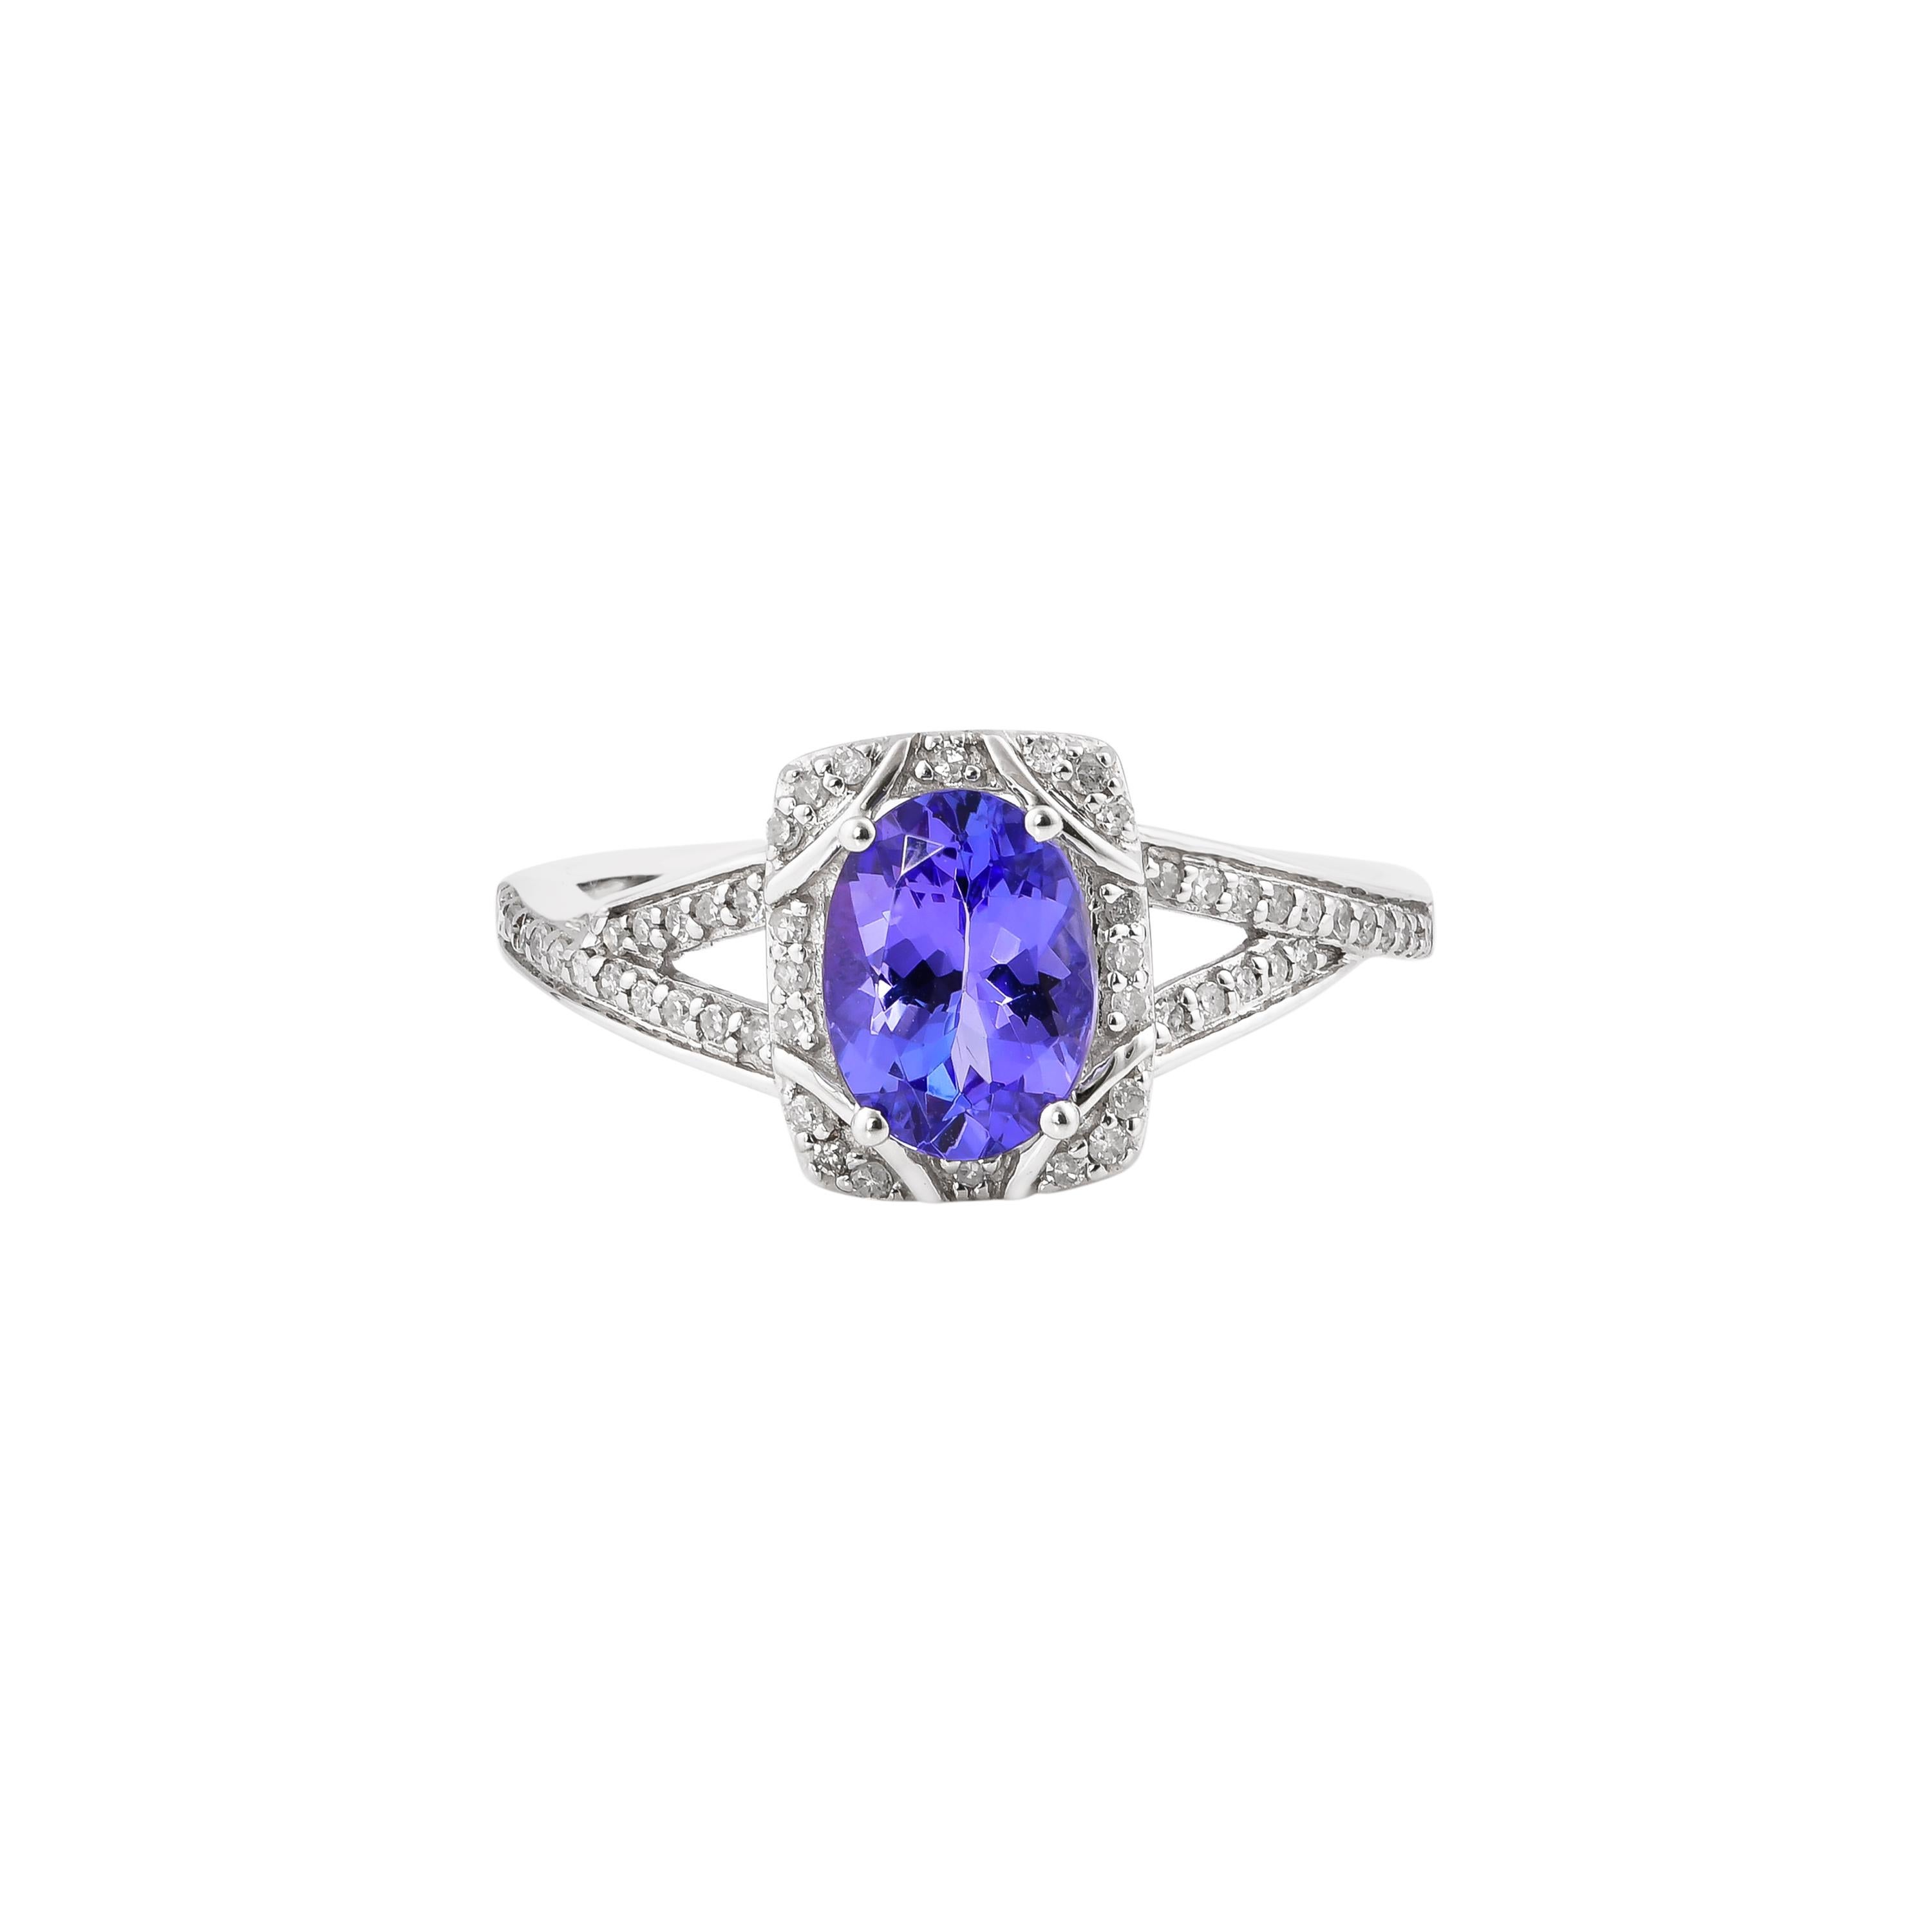 Oval Cut 1.190 Carat Tanzanite Ring in 10 Karat White Gold with Diamond. For Sale